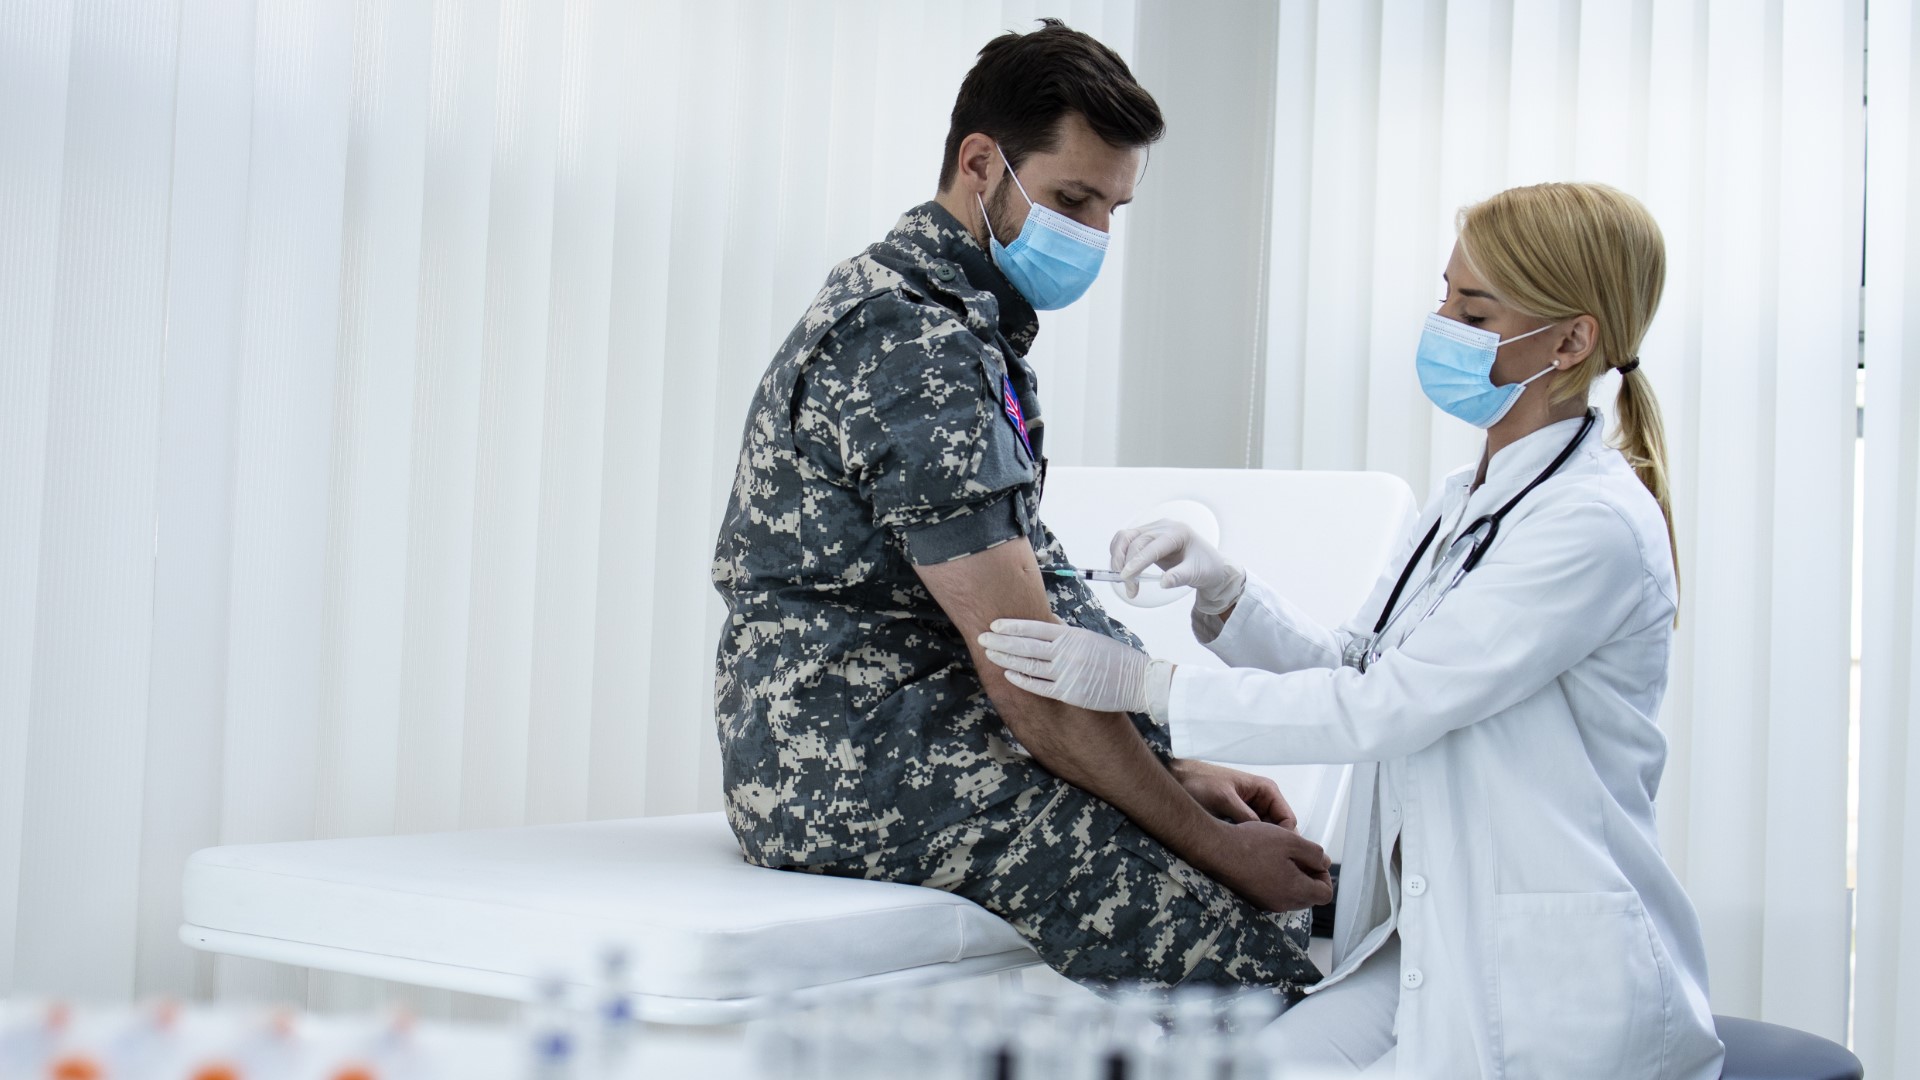 The Verify team looked into whether military members can be discharged for refusing vaccine. Our experts say this is true.